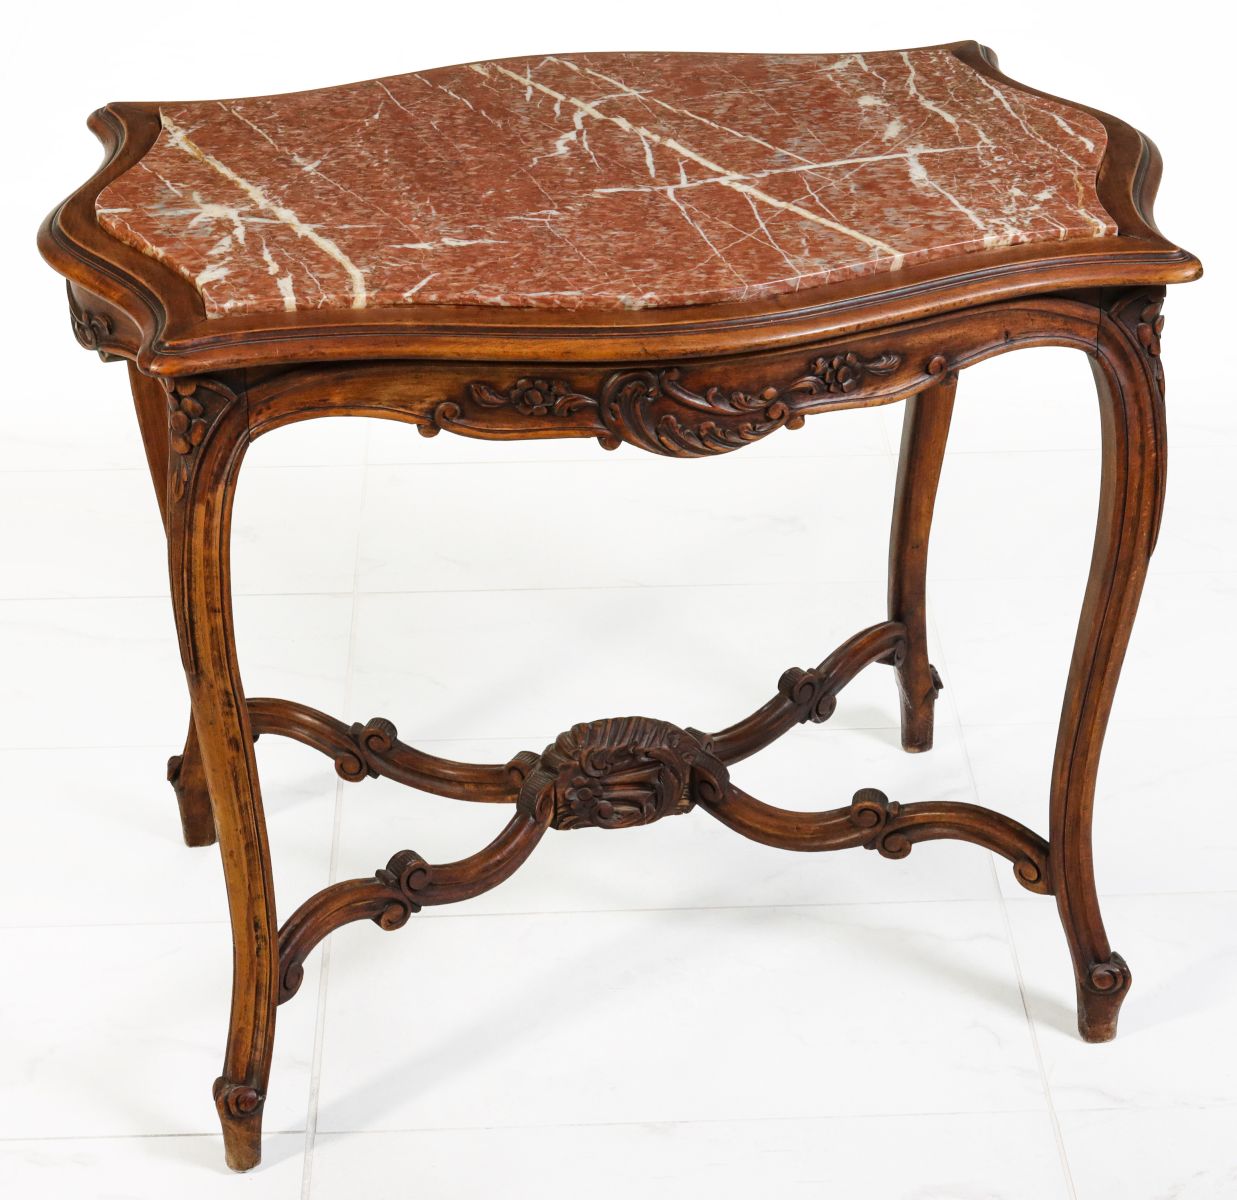 A 19TH CENTURY FRENCH LOUIS XV STYLE CENTER TABLE